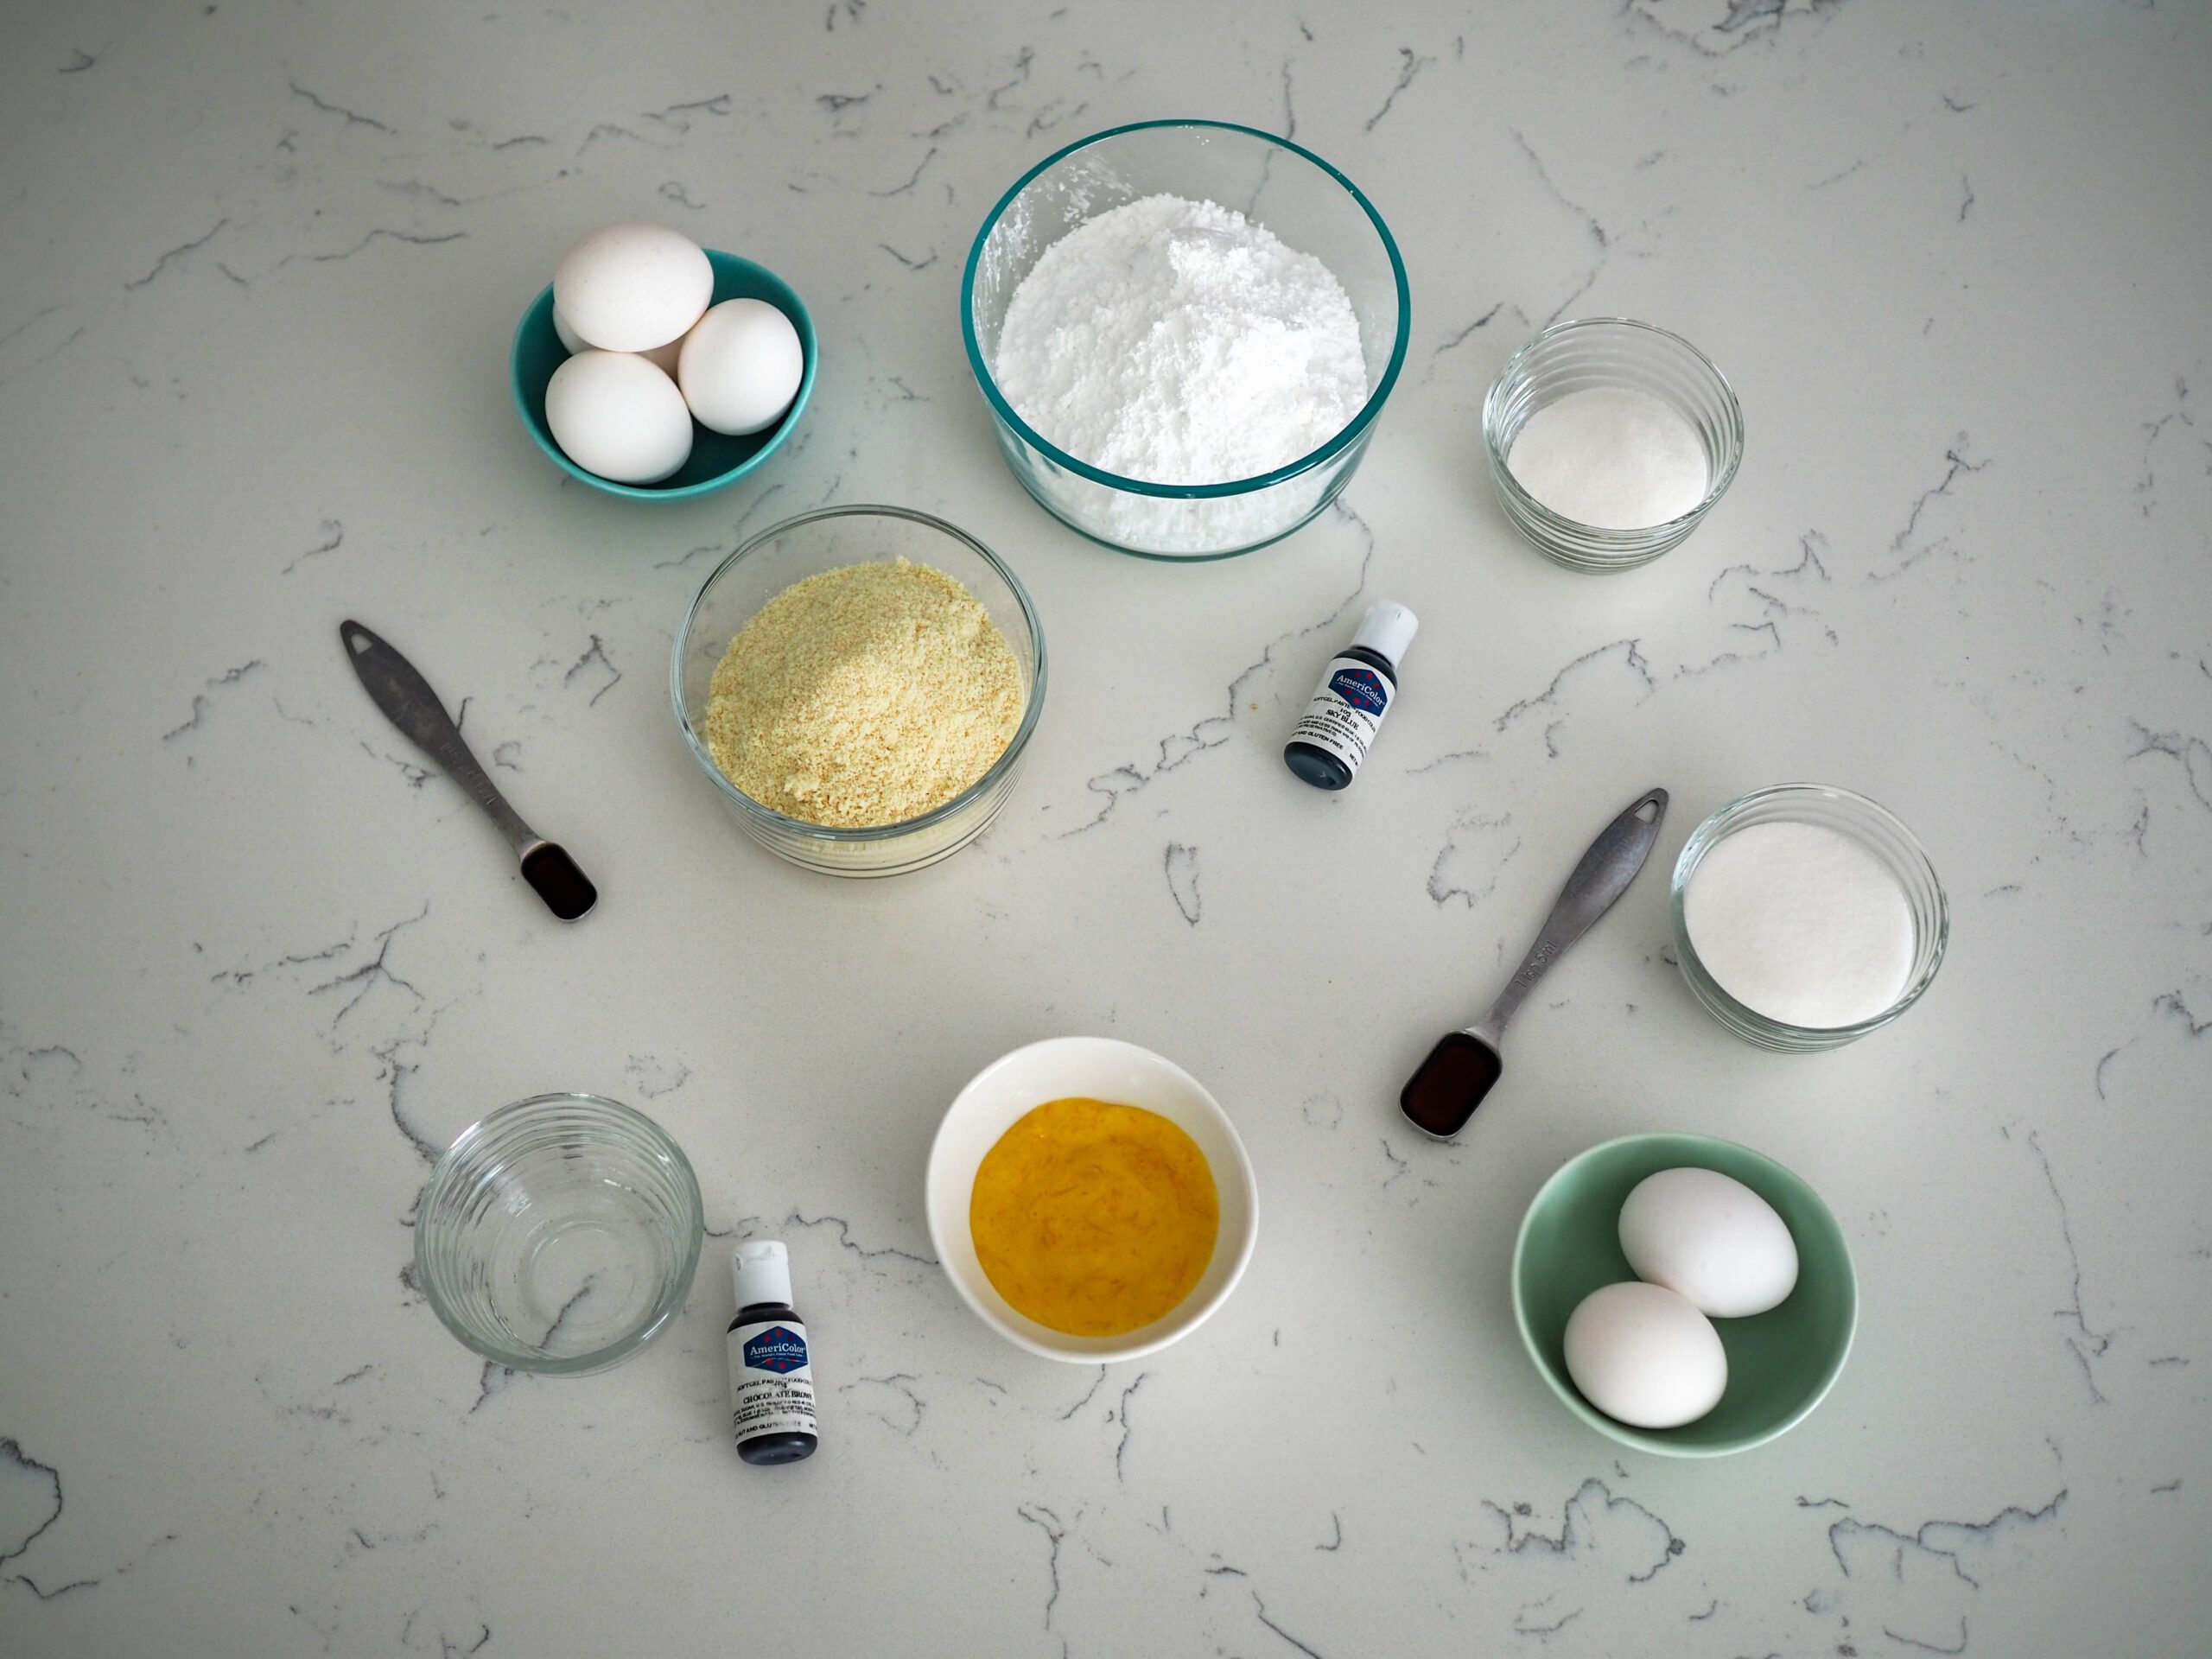 The ingredients for robin's egg macarons, laid out on a marblesque quartz countertop.